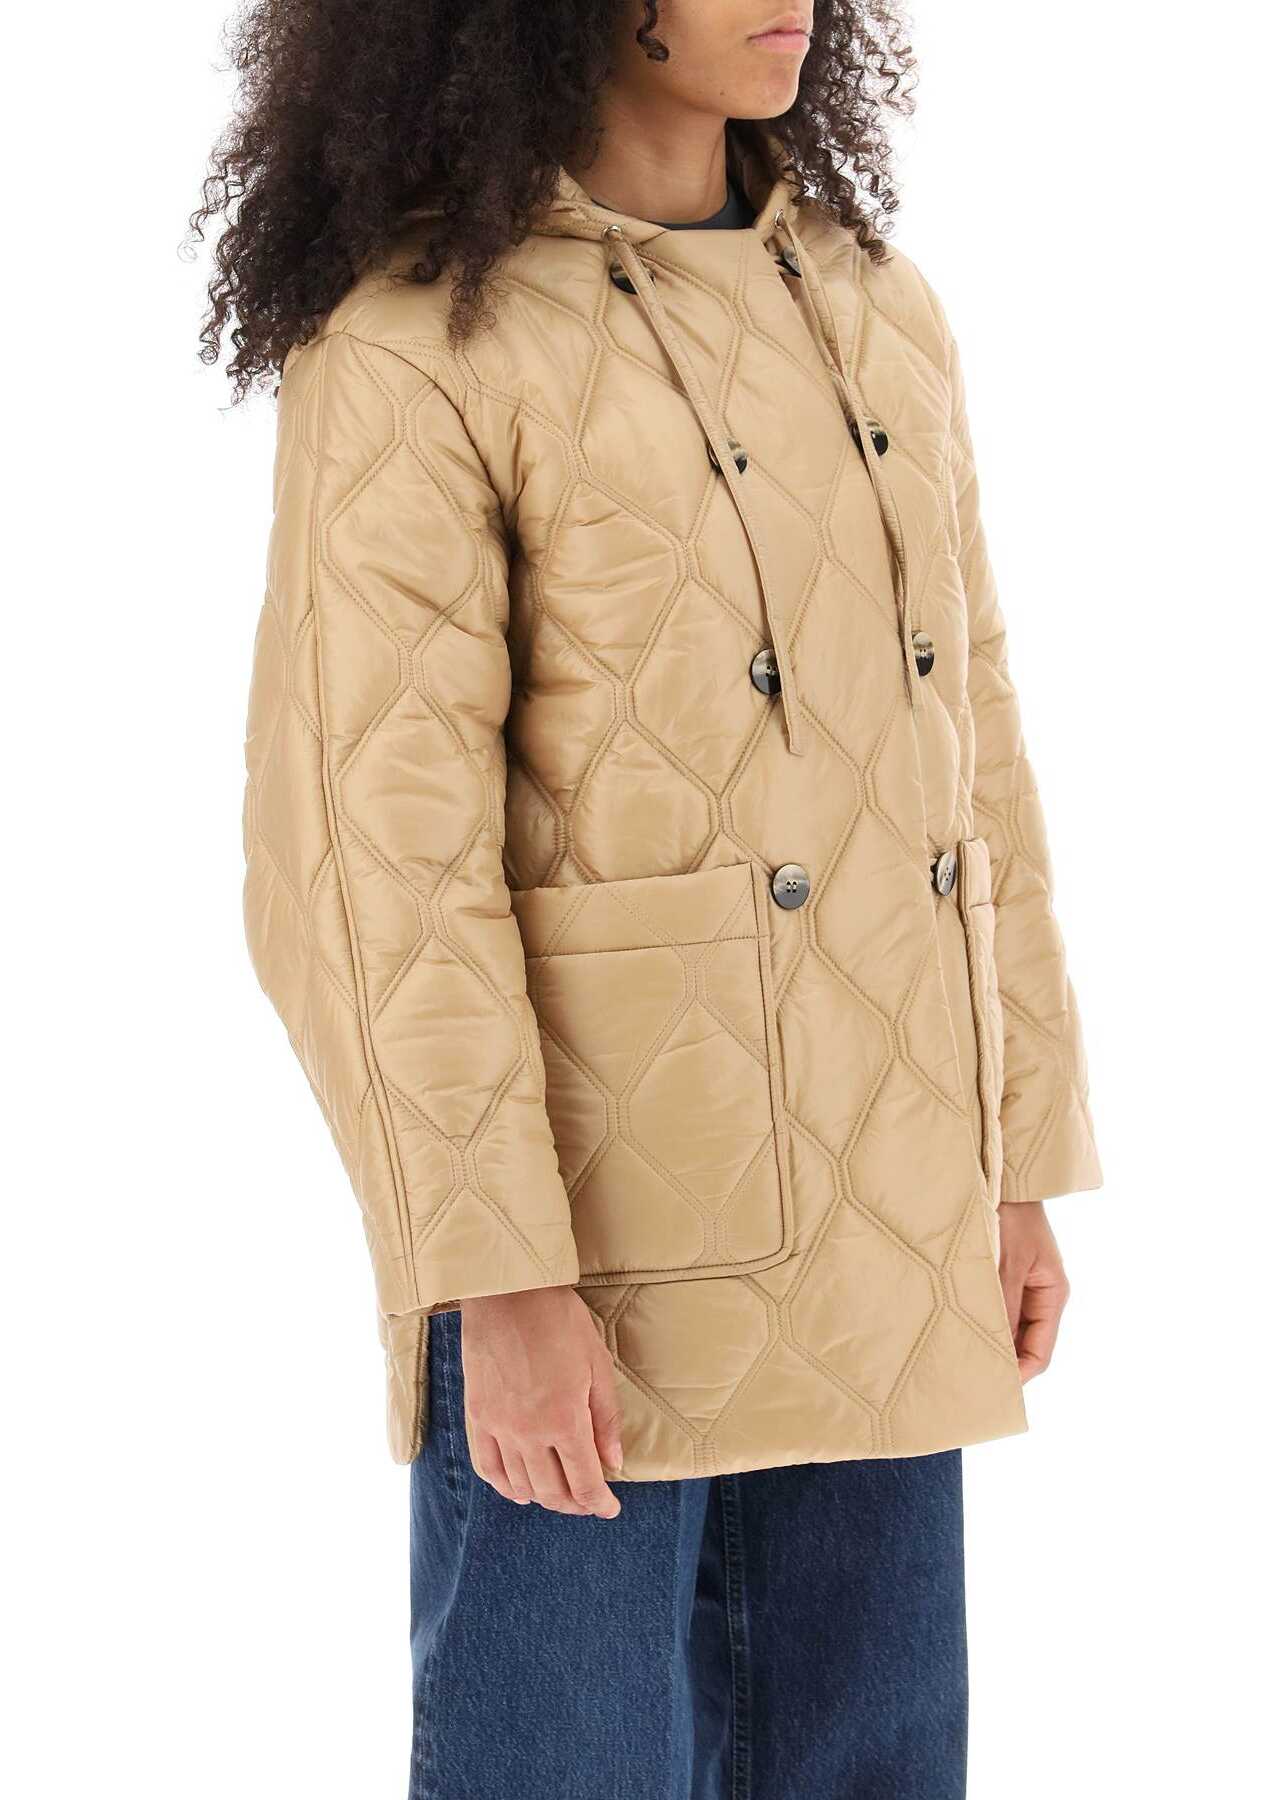 Ganni Hooded Quilted Jacket TANIN image0